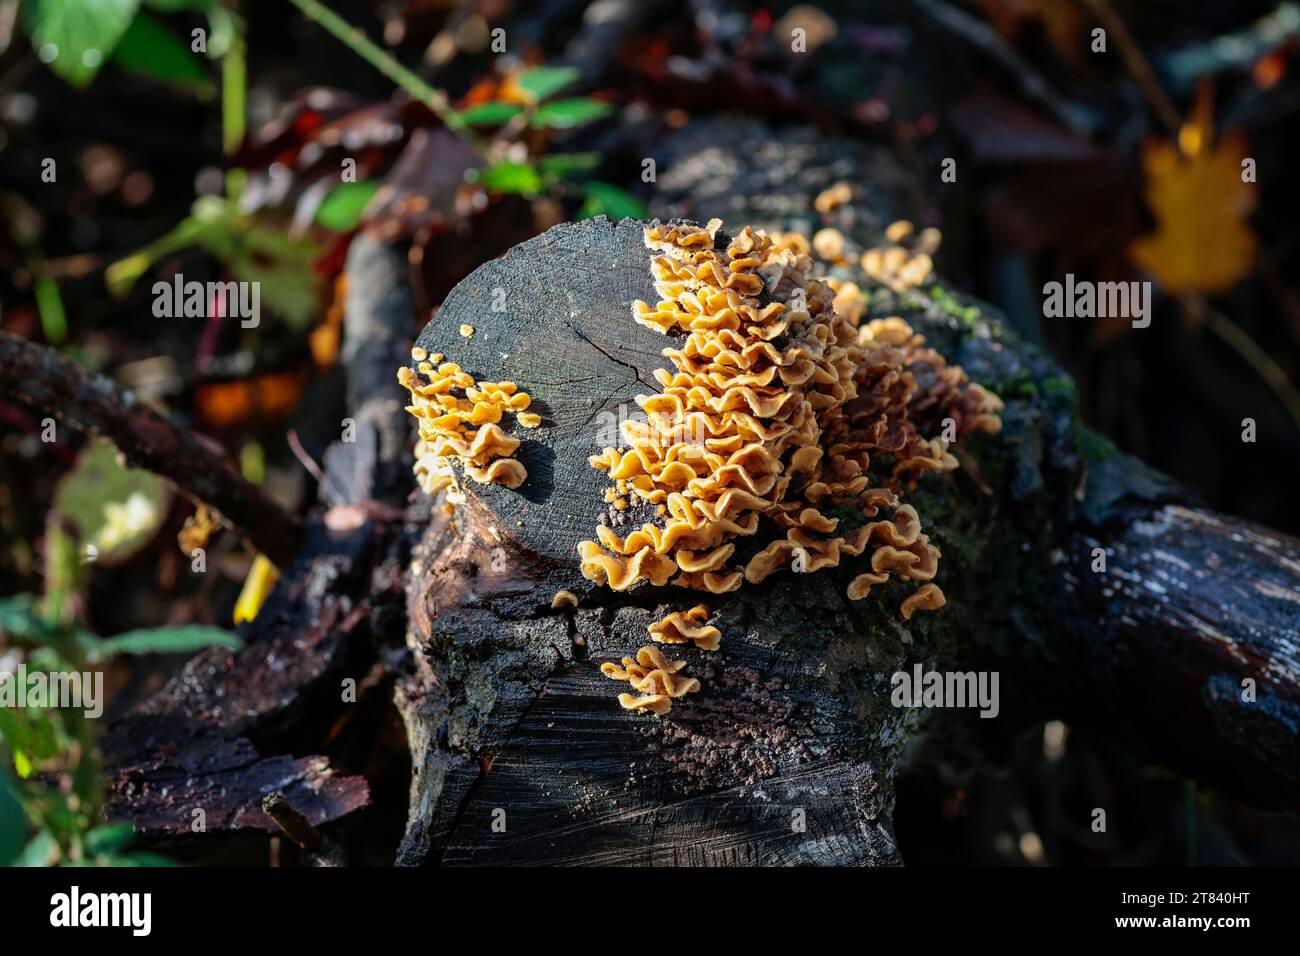 Hairy stereum Stereum hirsutum, tiers of tough rubbery fungi brackets with wavy margins orange yellow lower surface grey hairy upper surface Stock Photo